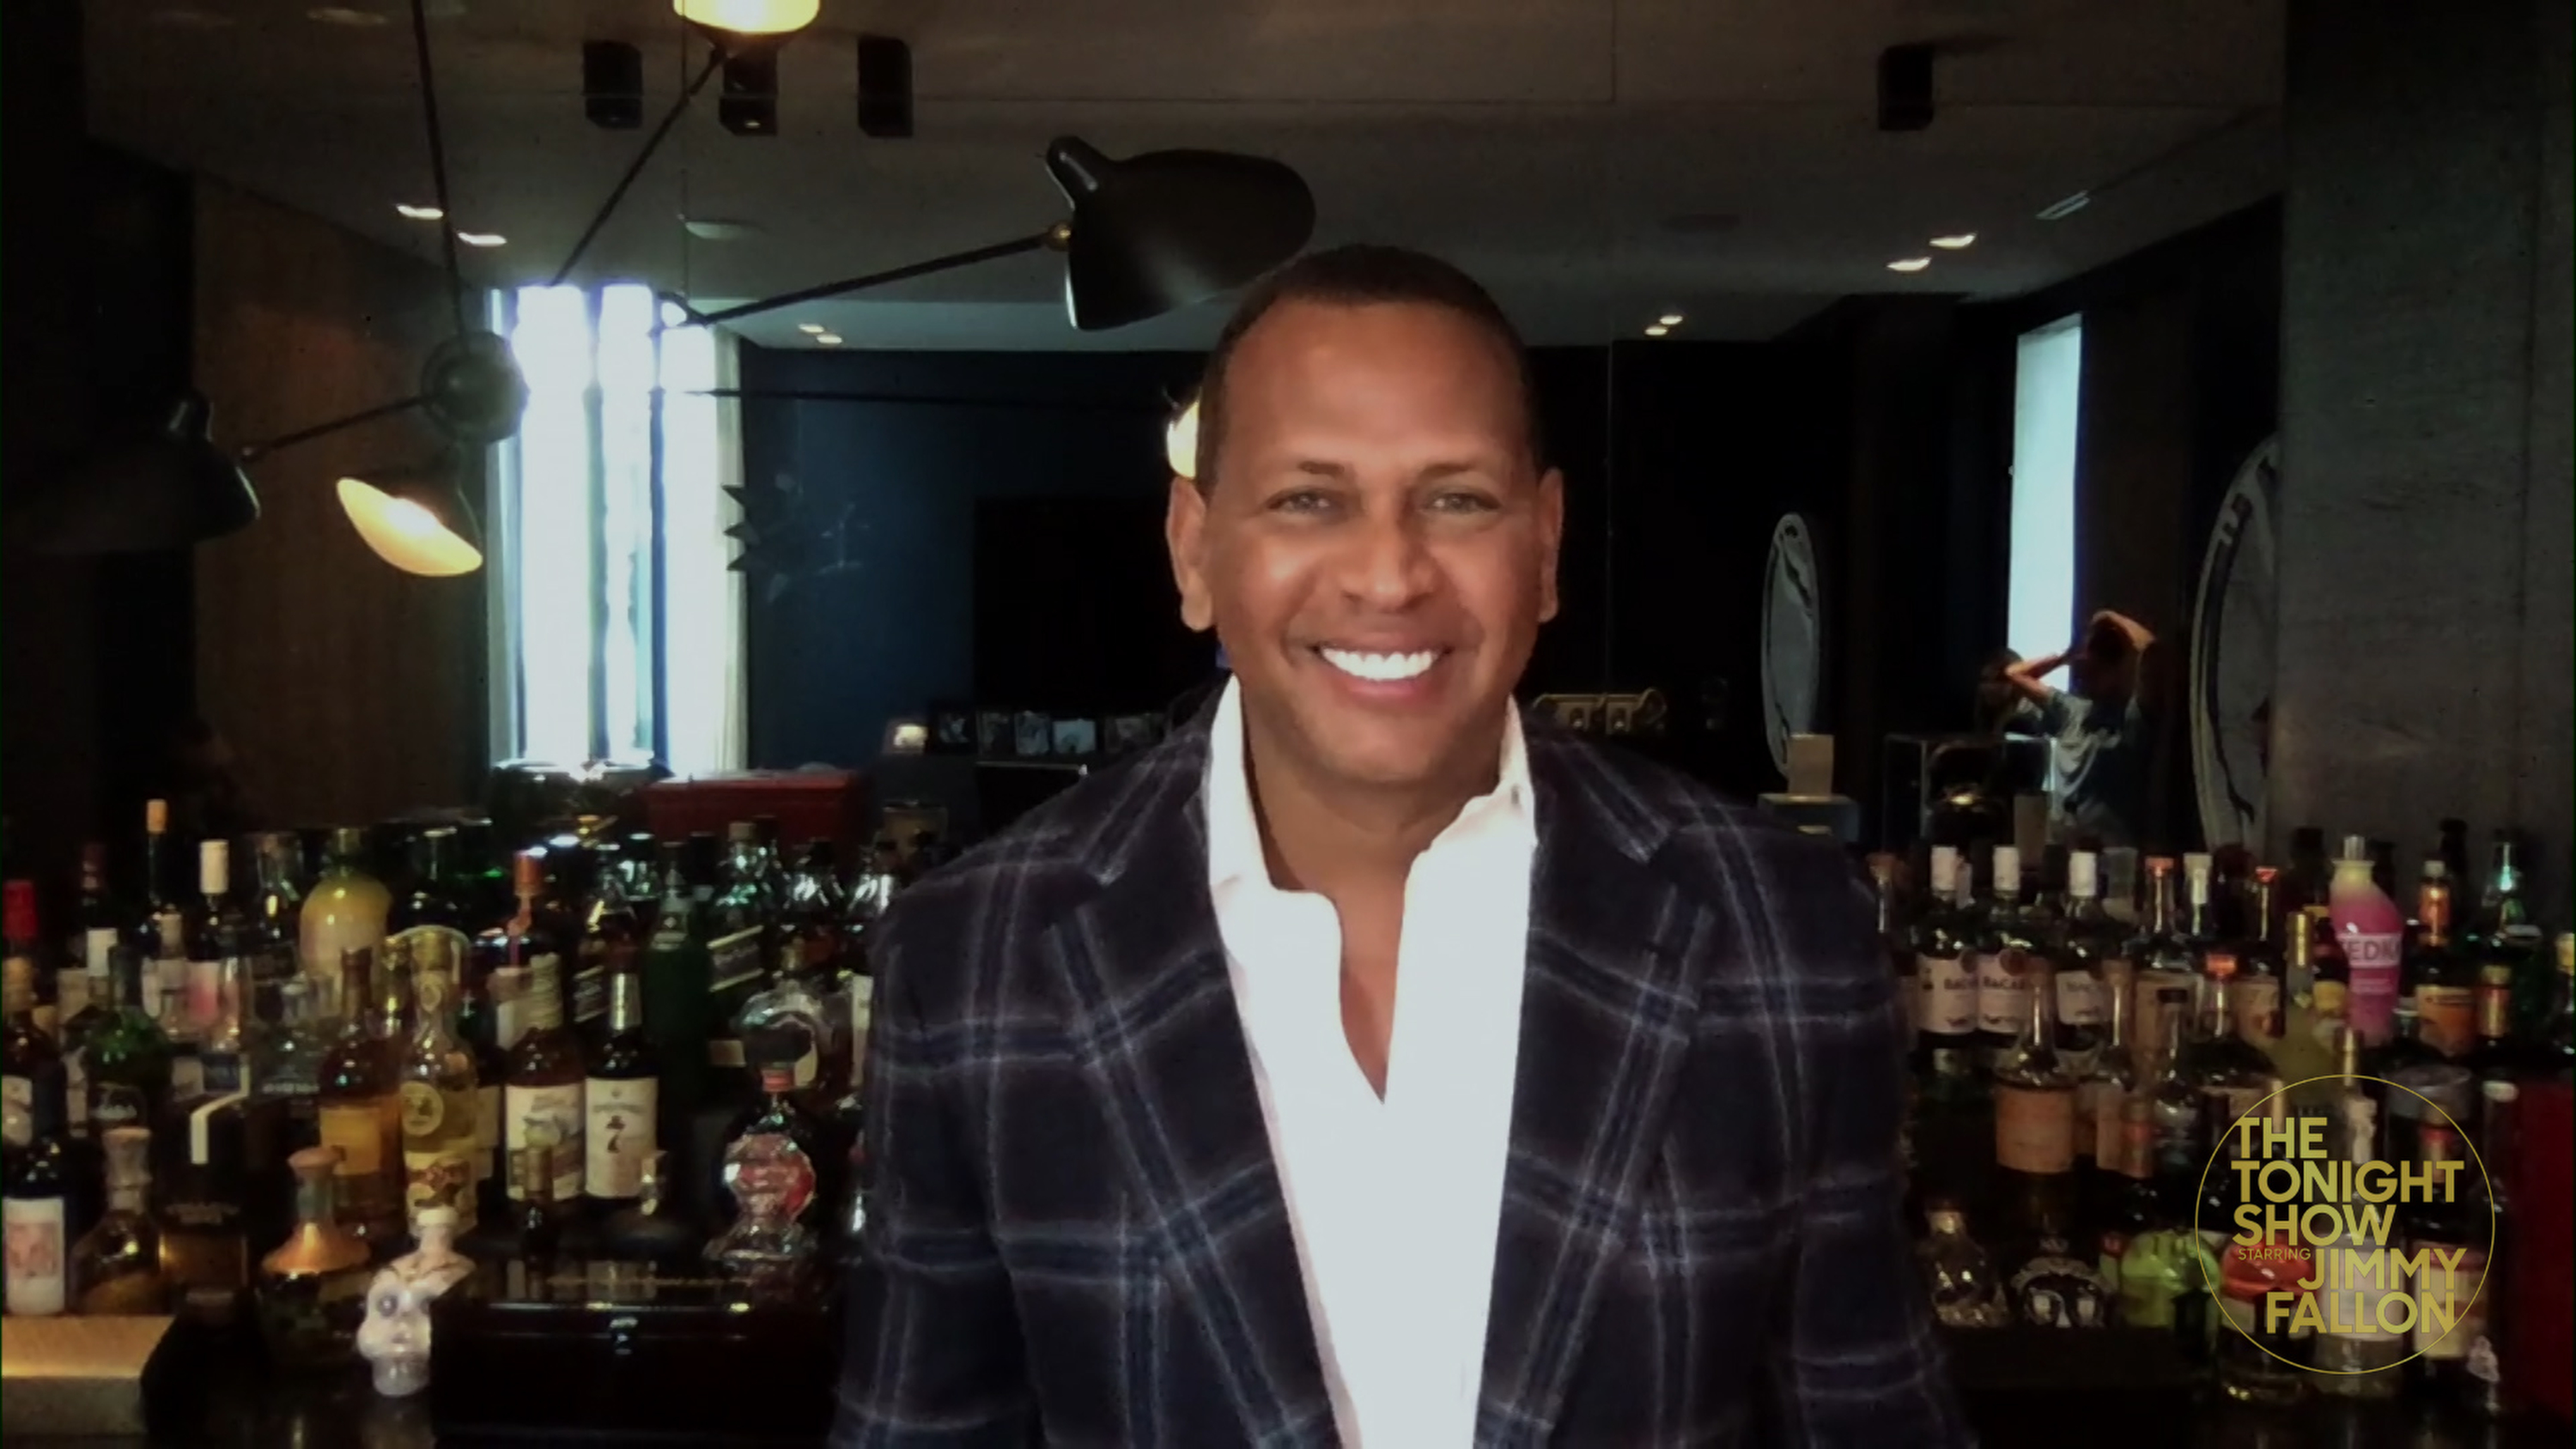 Screengrab of Alex Rodriguez during an interview on The Tonight Show Starring Jimmy Fallon